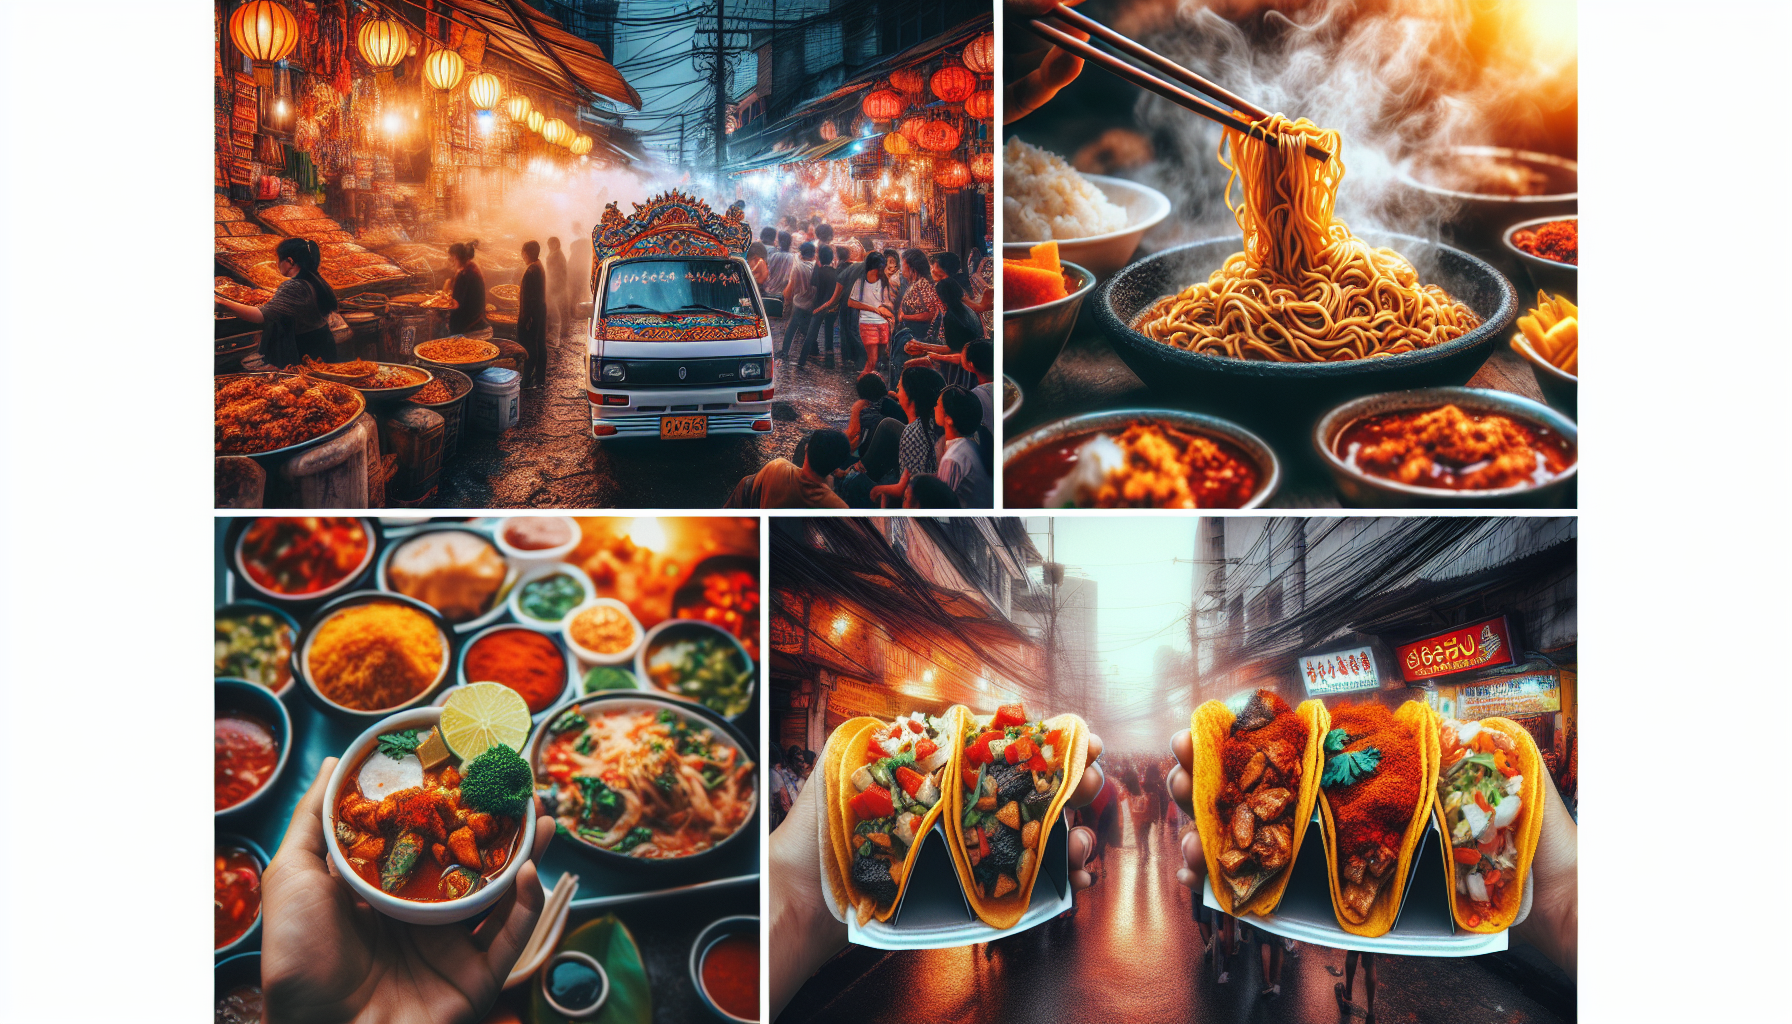 explore the world's best street foods with our travel blog. from tantalizing tacos to aromatic pho, savor the flavors of the globe with our culinary adventures.